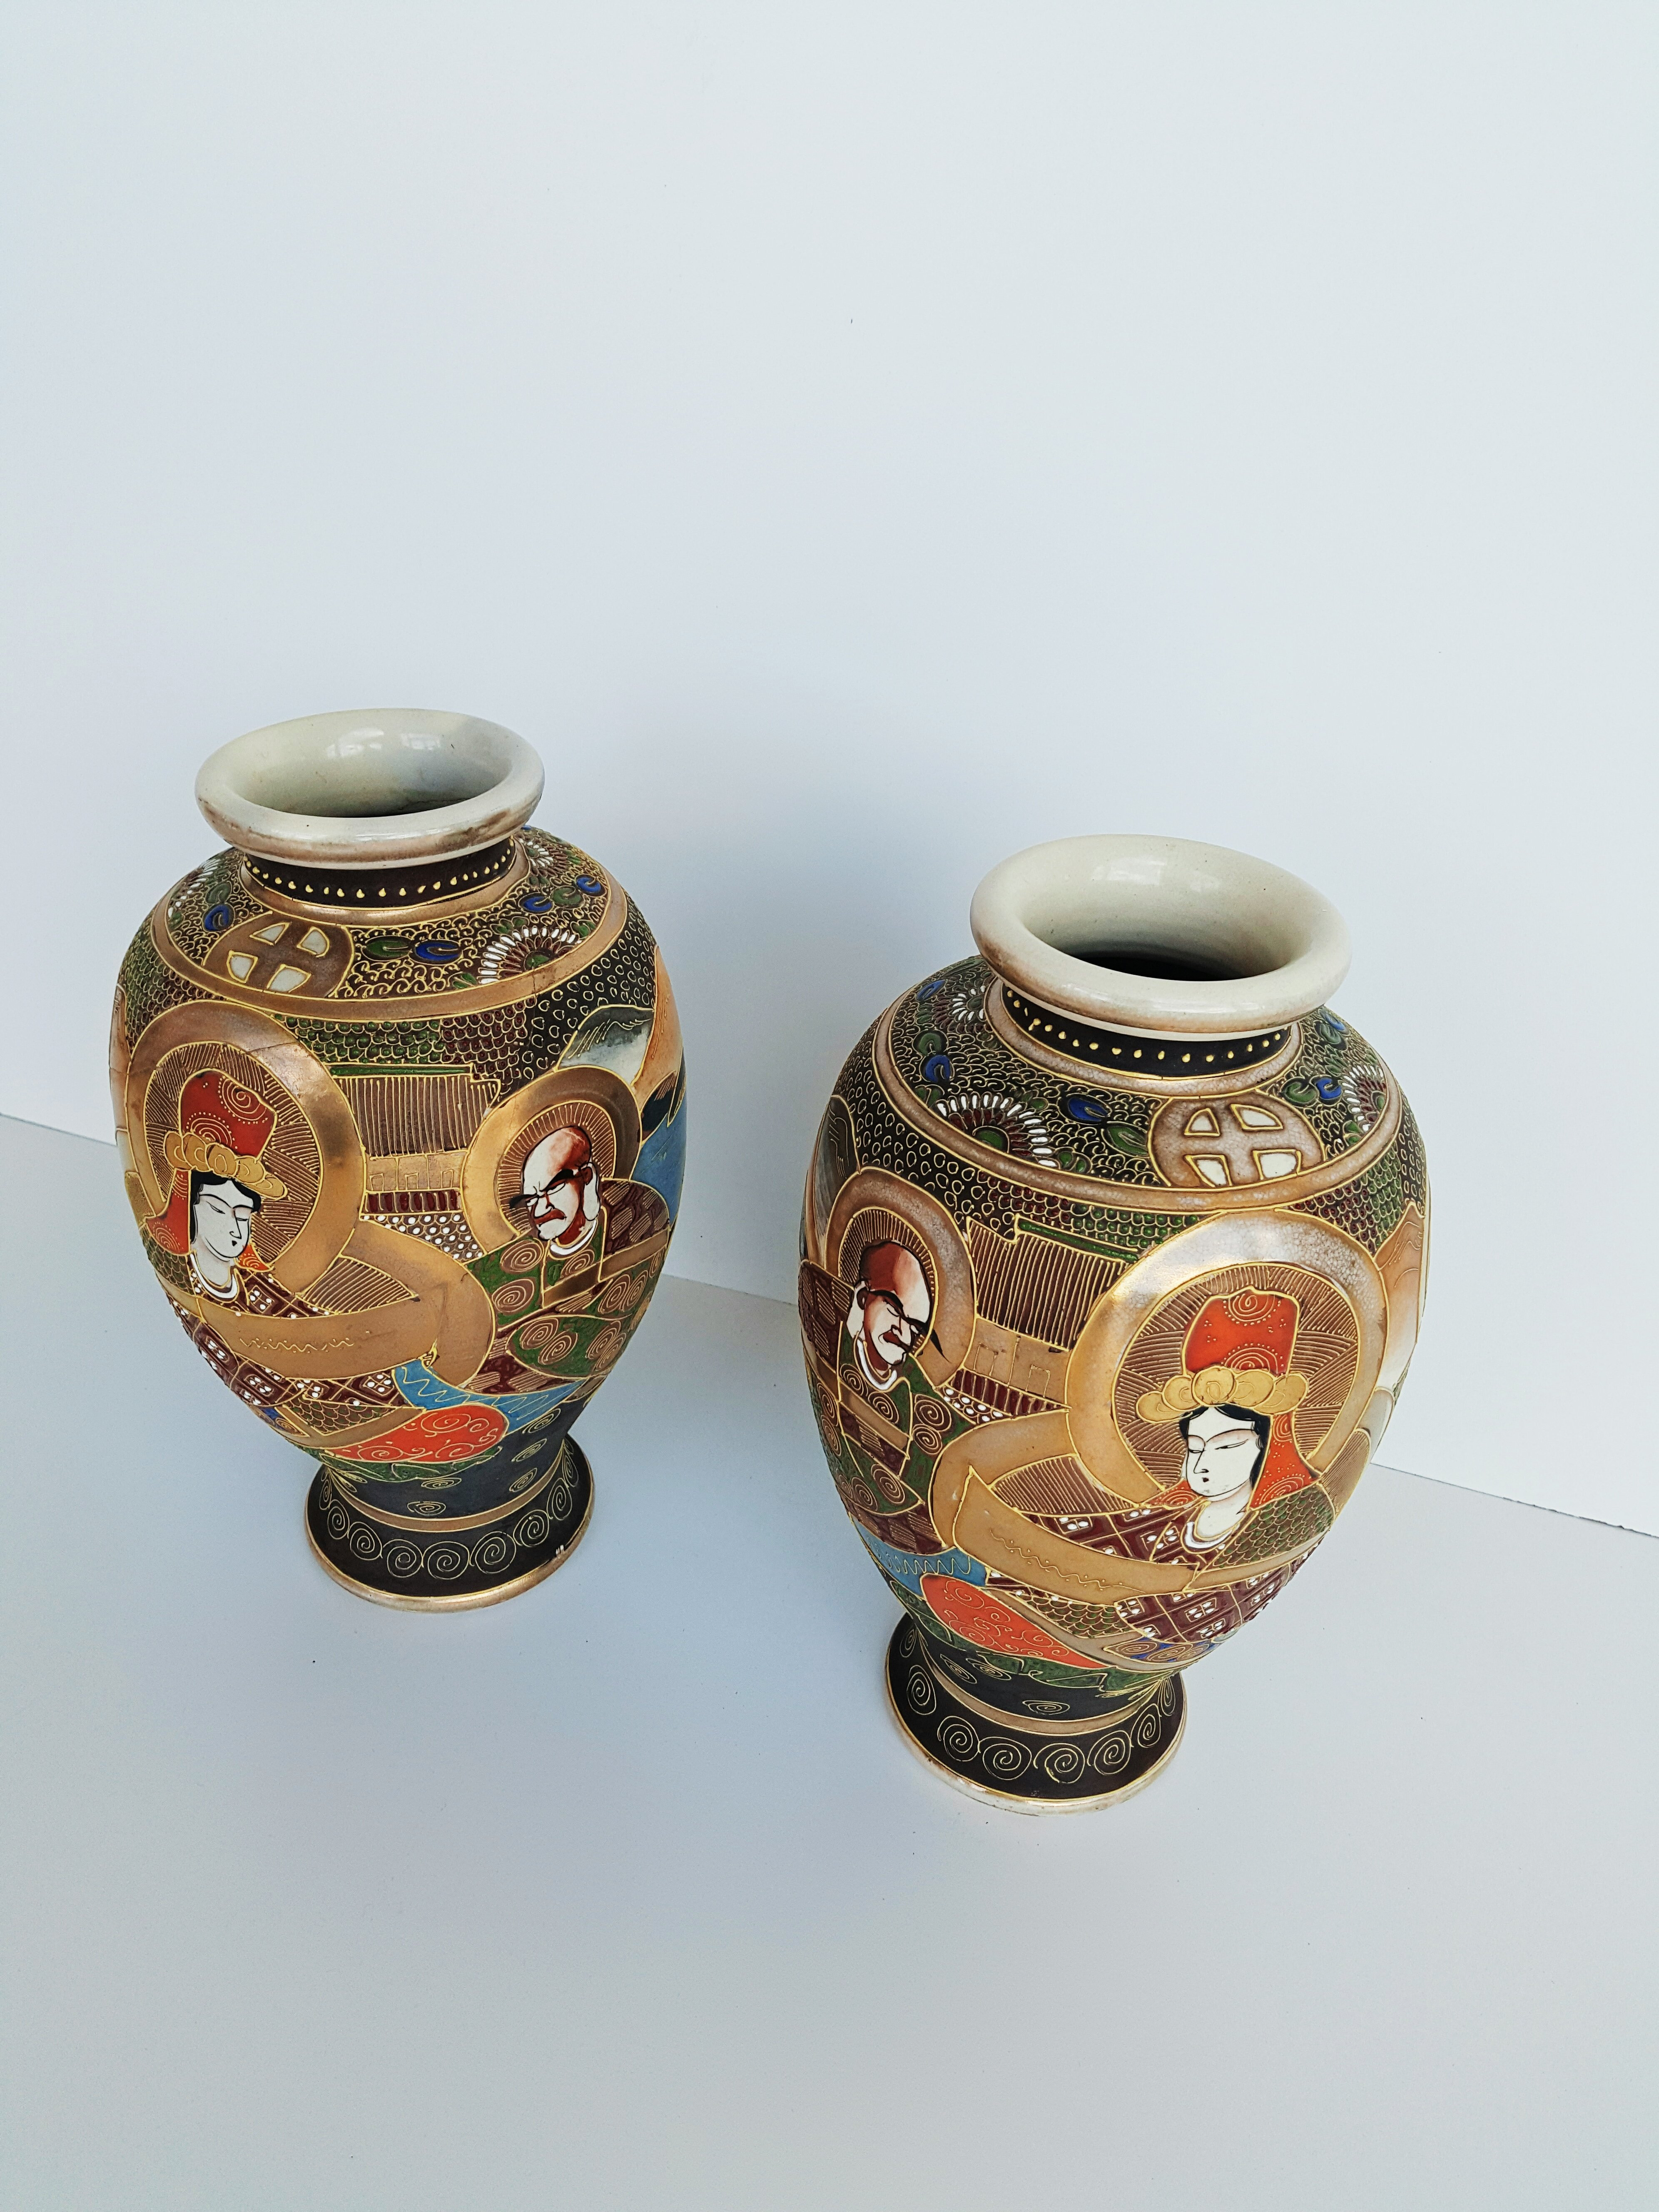 19 Recommended Hand Painted Satsuma Vase 2024 free download hand painted satsuma vase of early 20th century pair of japanese satsuma vases in painted ceramic regarding early 20th century pair of japanese satsuma vases in painted ceramic for sale at 1